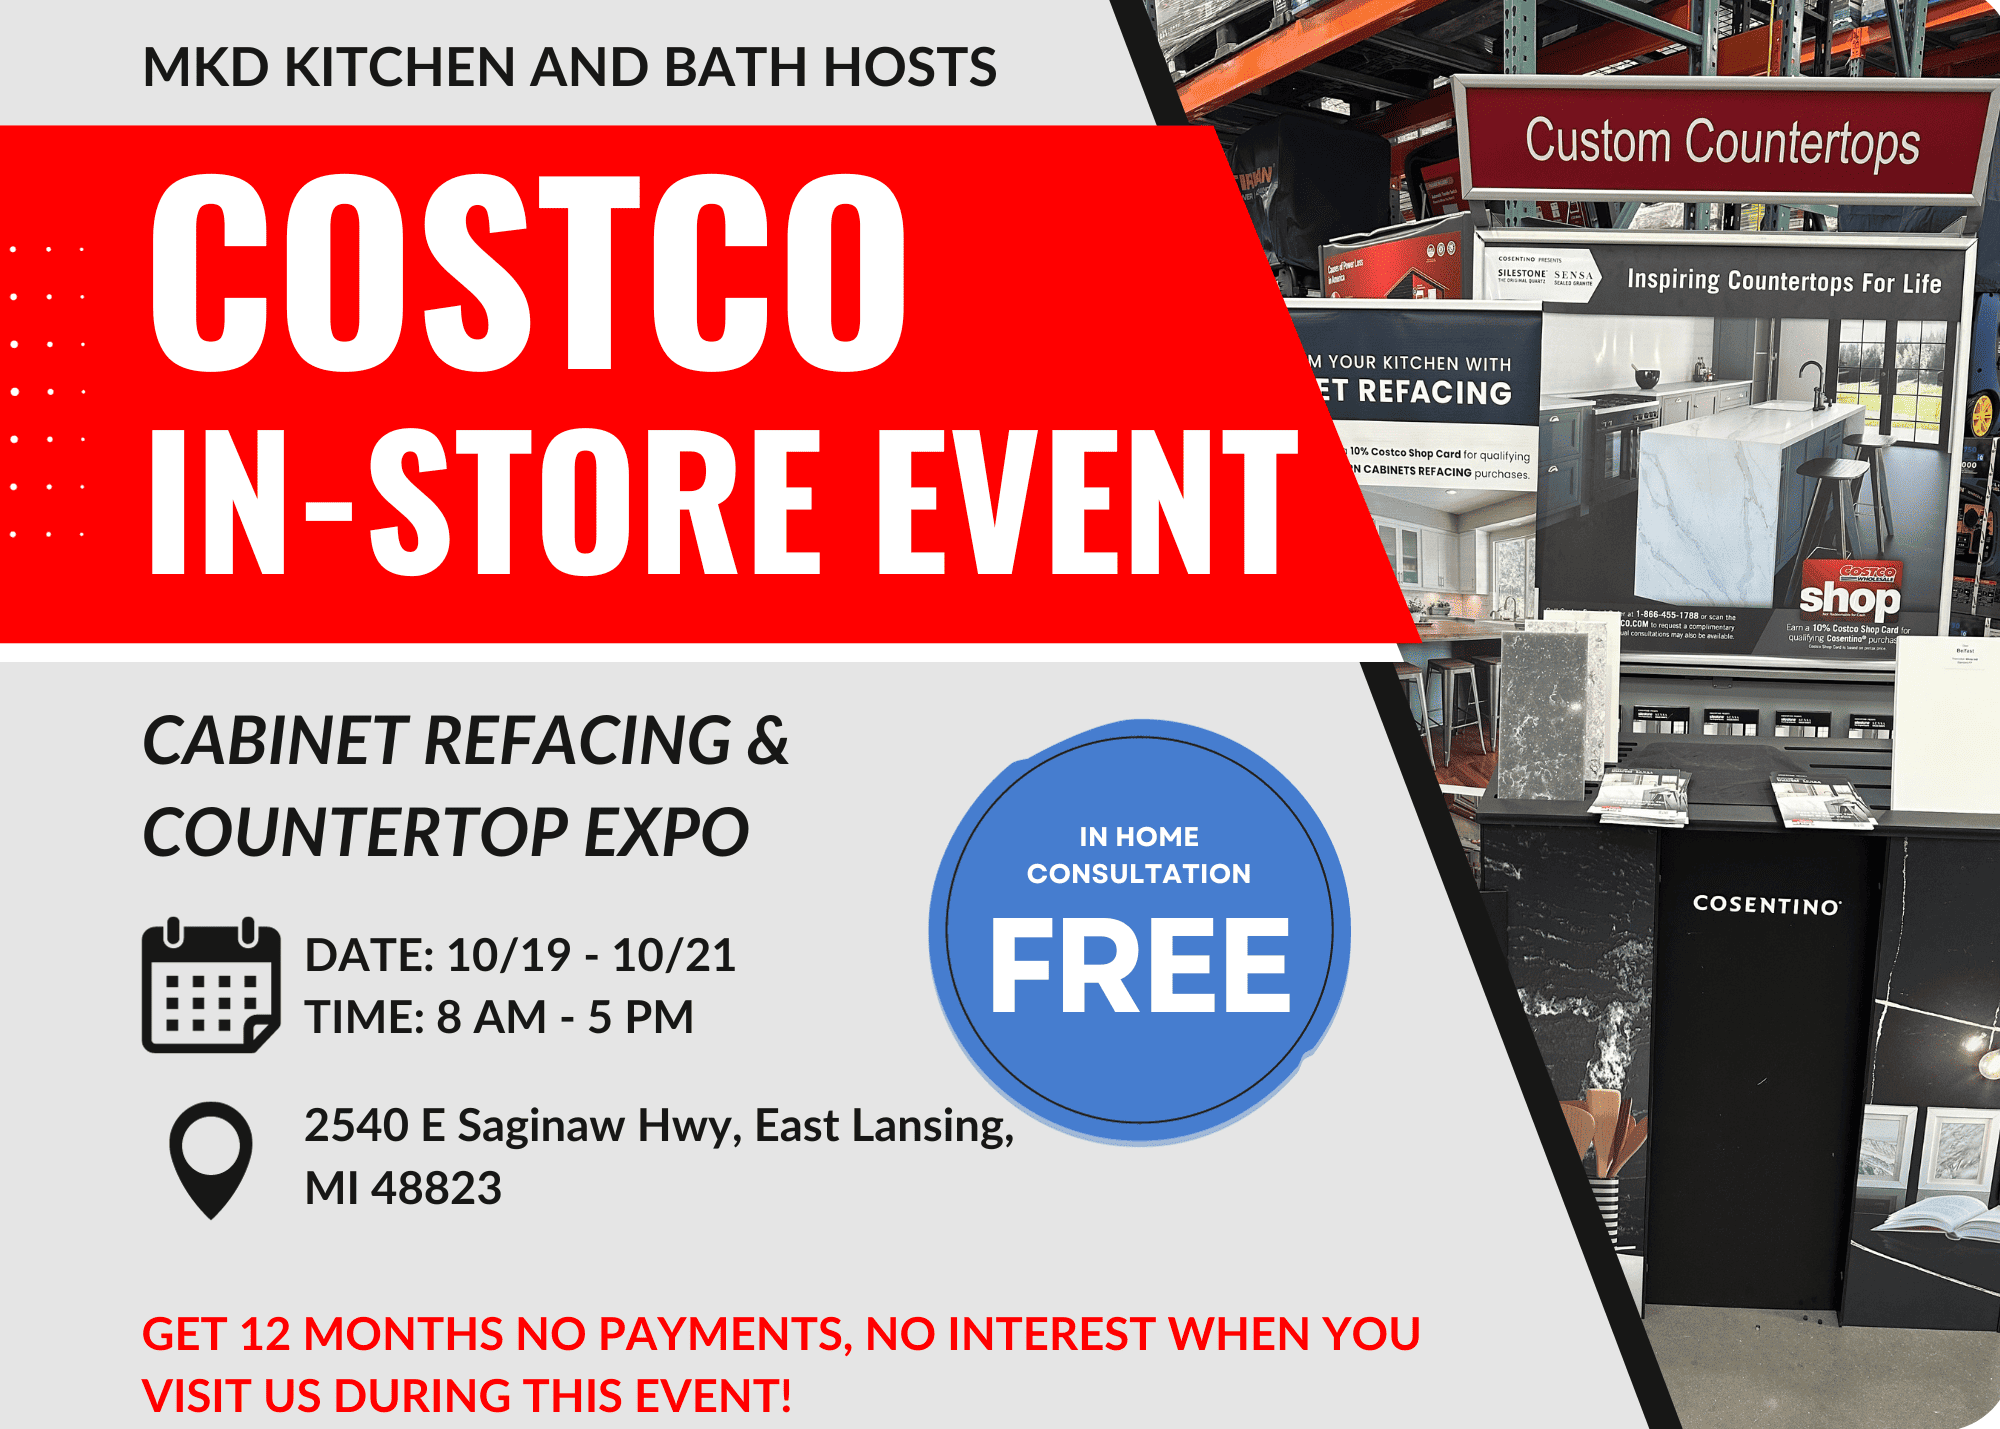 Costco event East Lansing